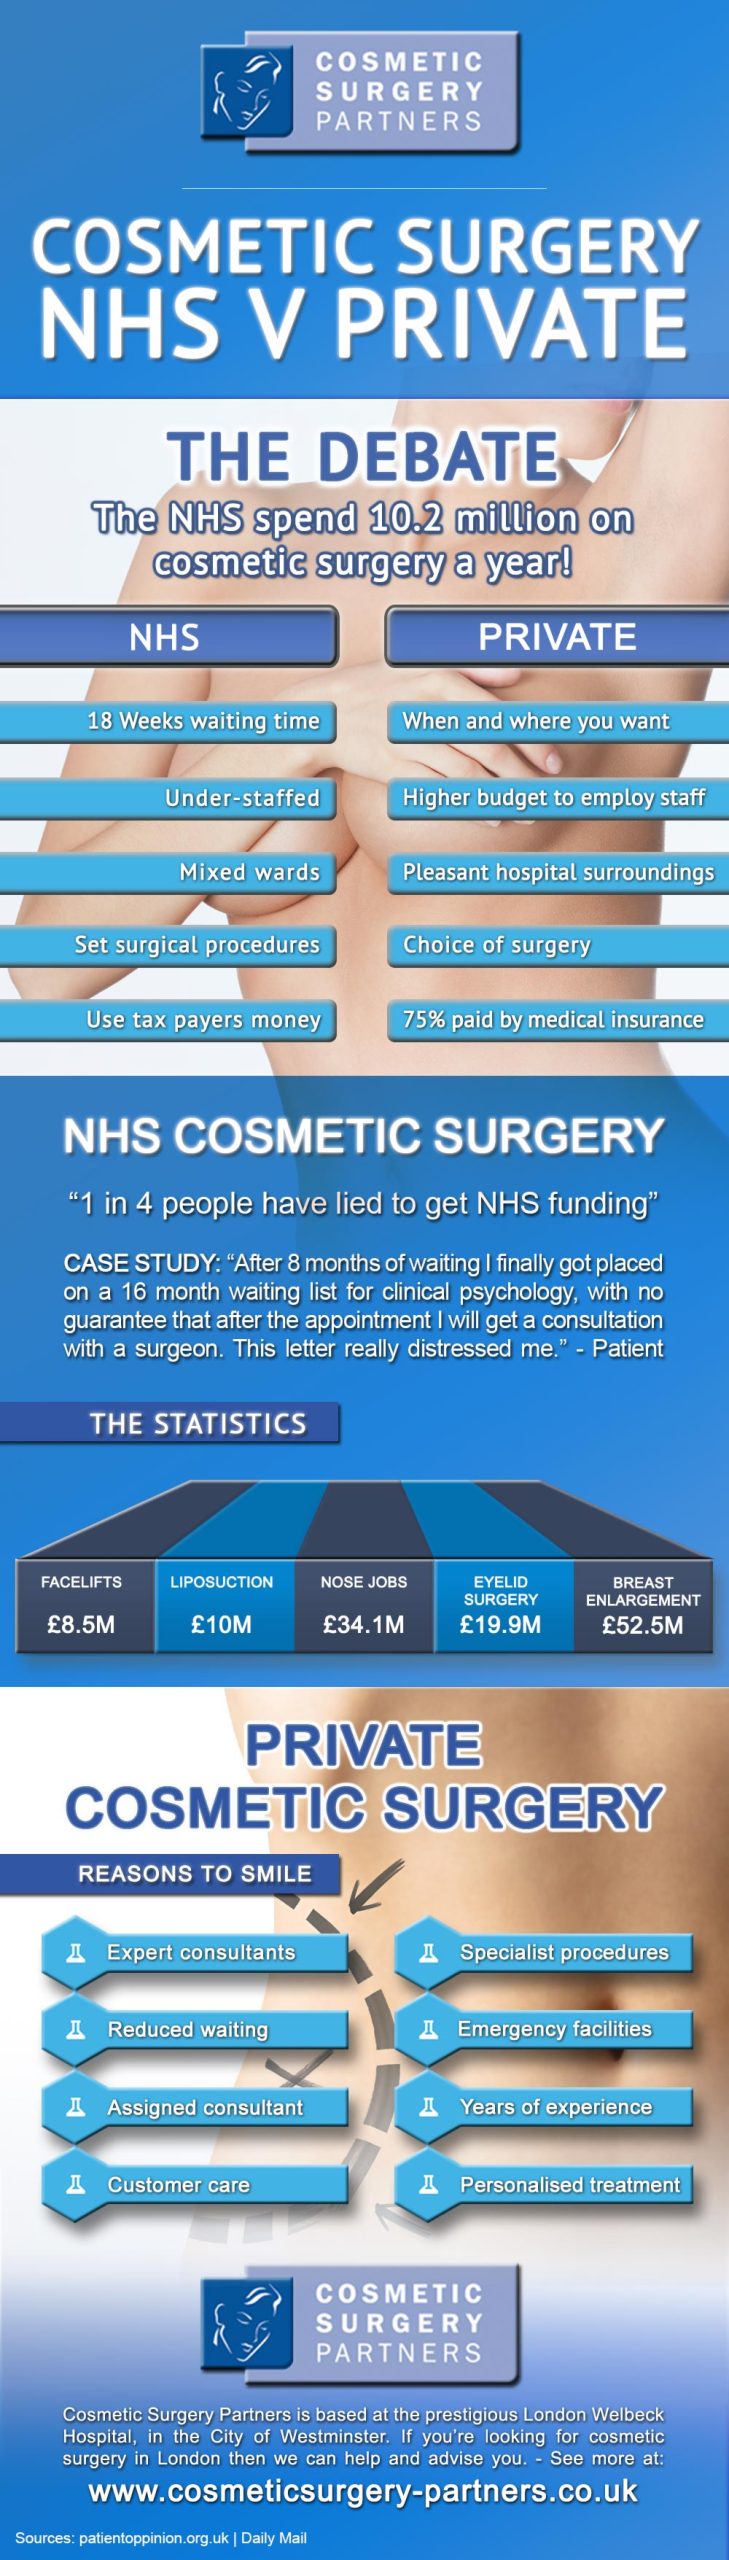 Cosmetic Surgery-Partners Infographic NHS vs Private UK